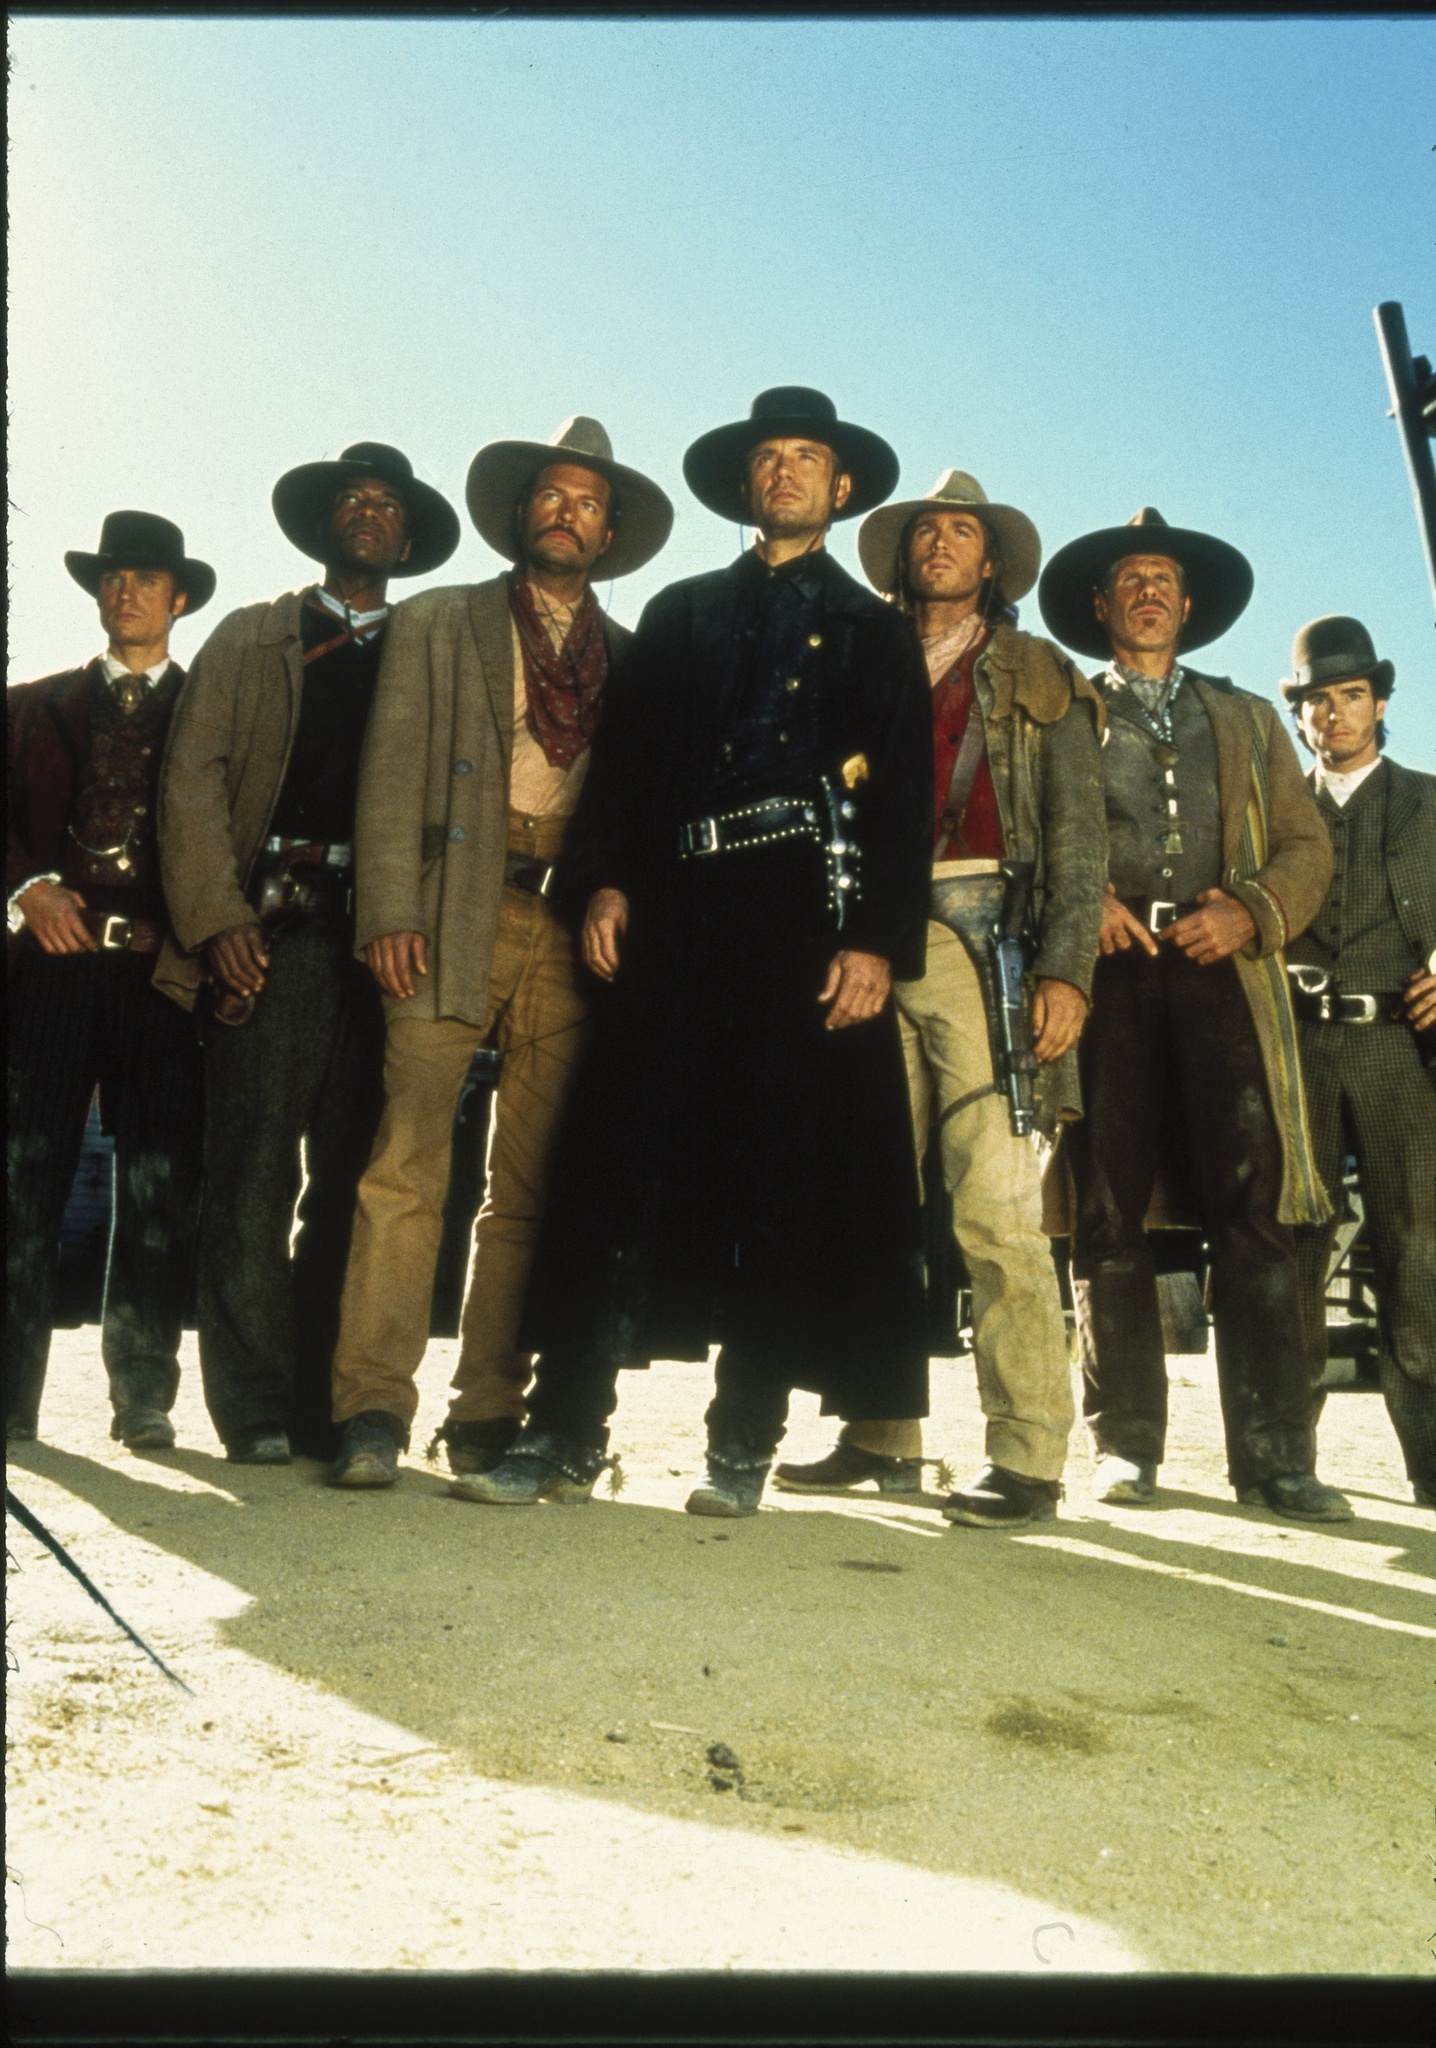 Still of Michael Biehn, Ron Perlman, Dale Midkiff, Eric Close, Andrew Kavovit, Anthony Starke and Rick Worthy in The Magnificent Seven (1998)